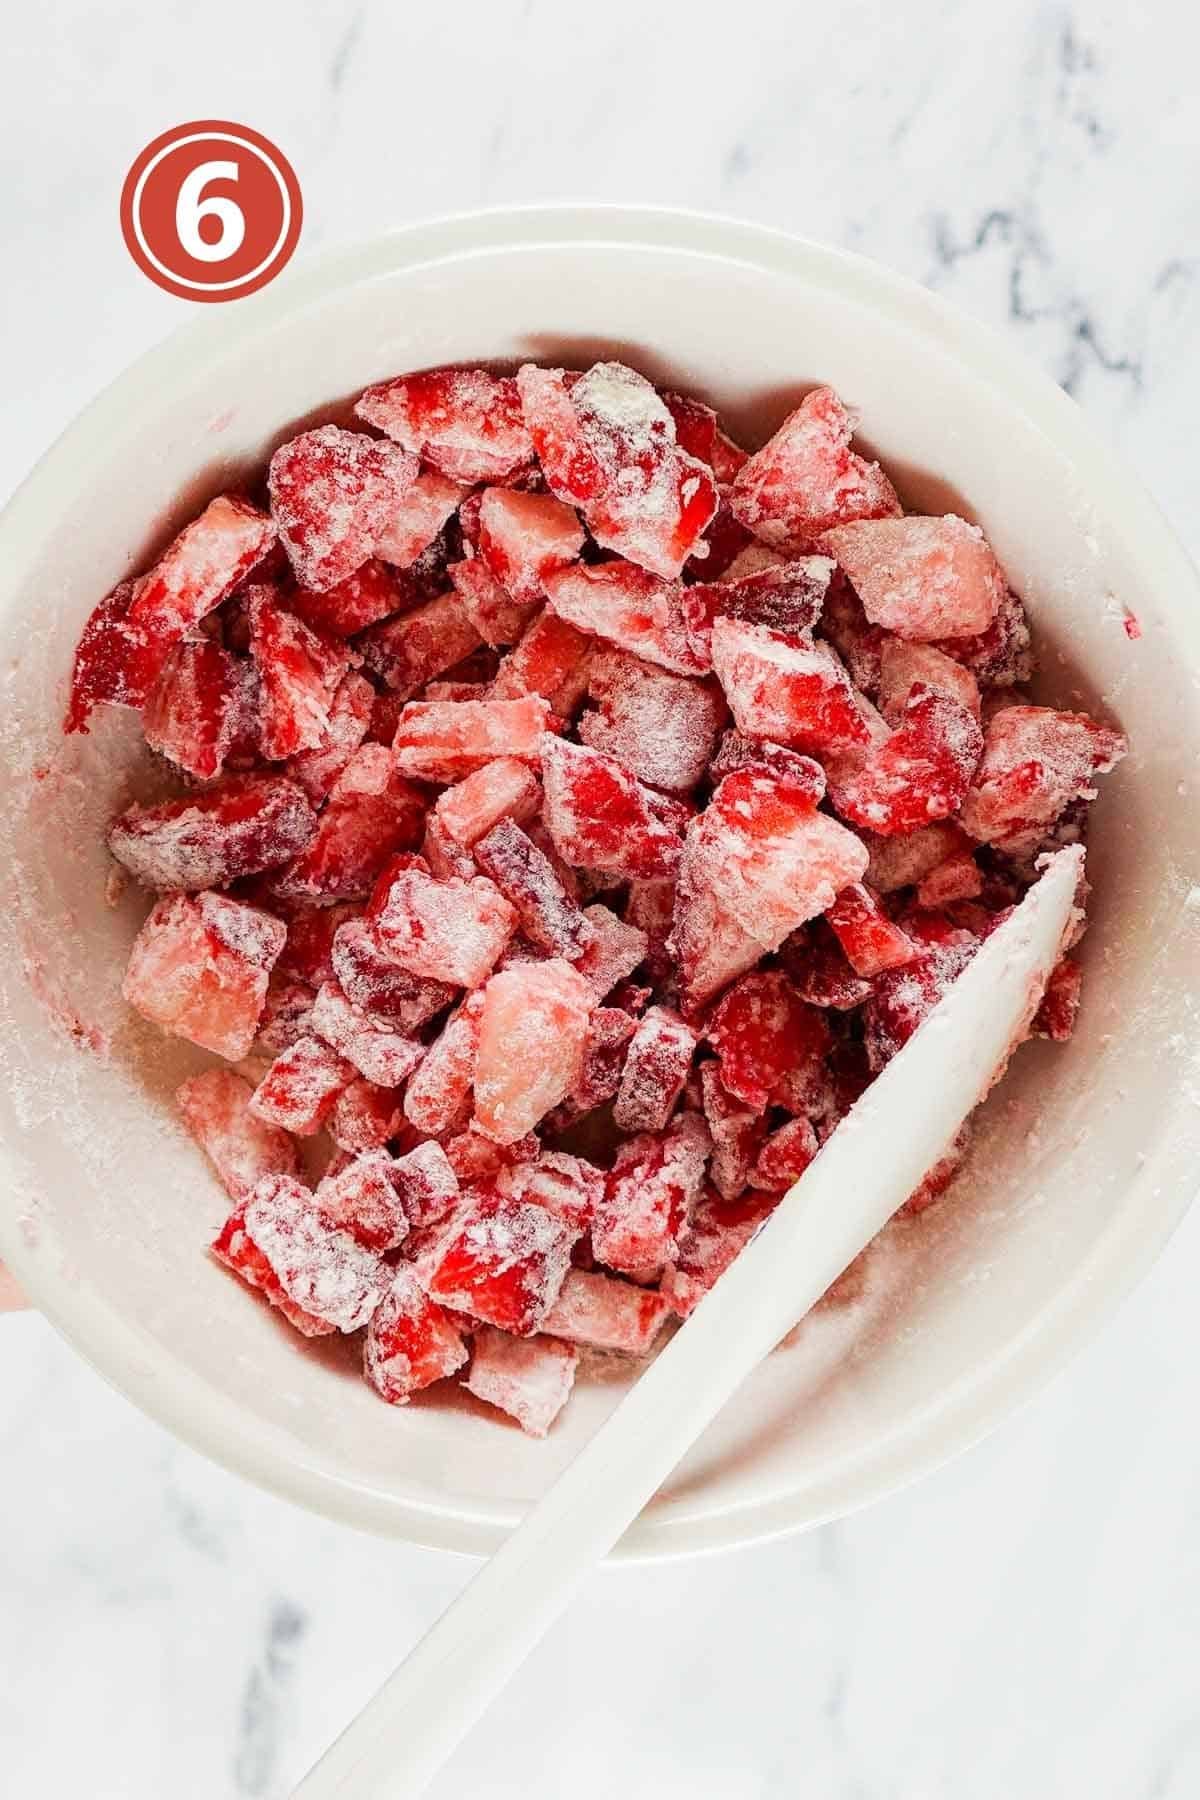 strawberries coated in a tablespoon of all purpose flour.